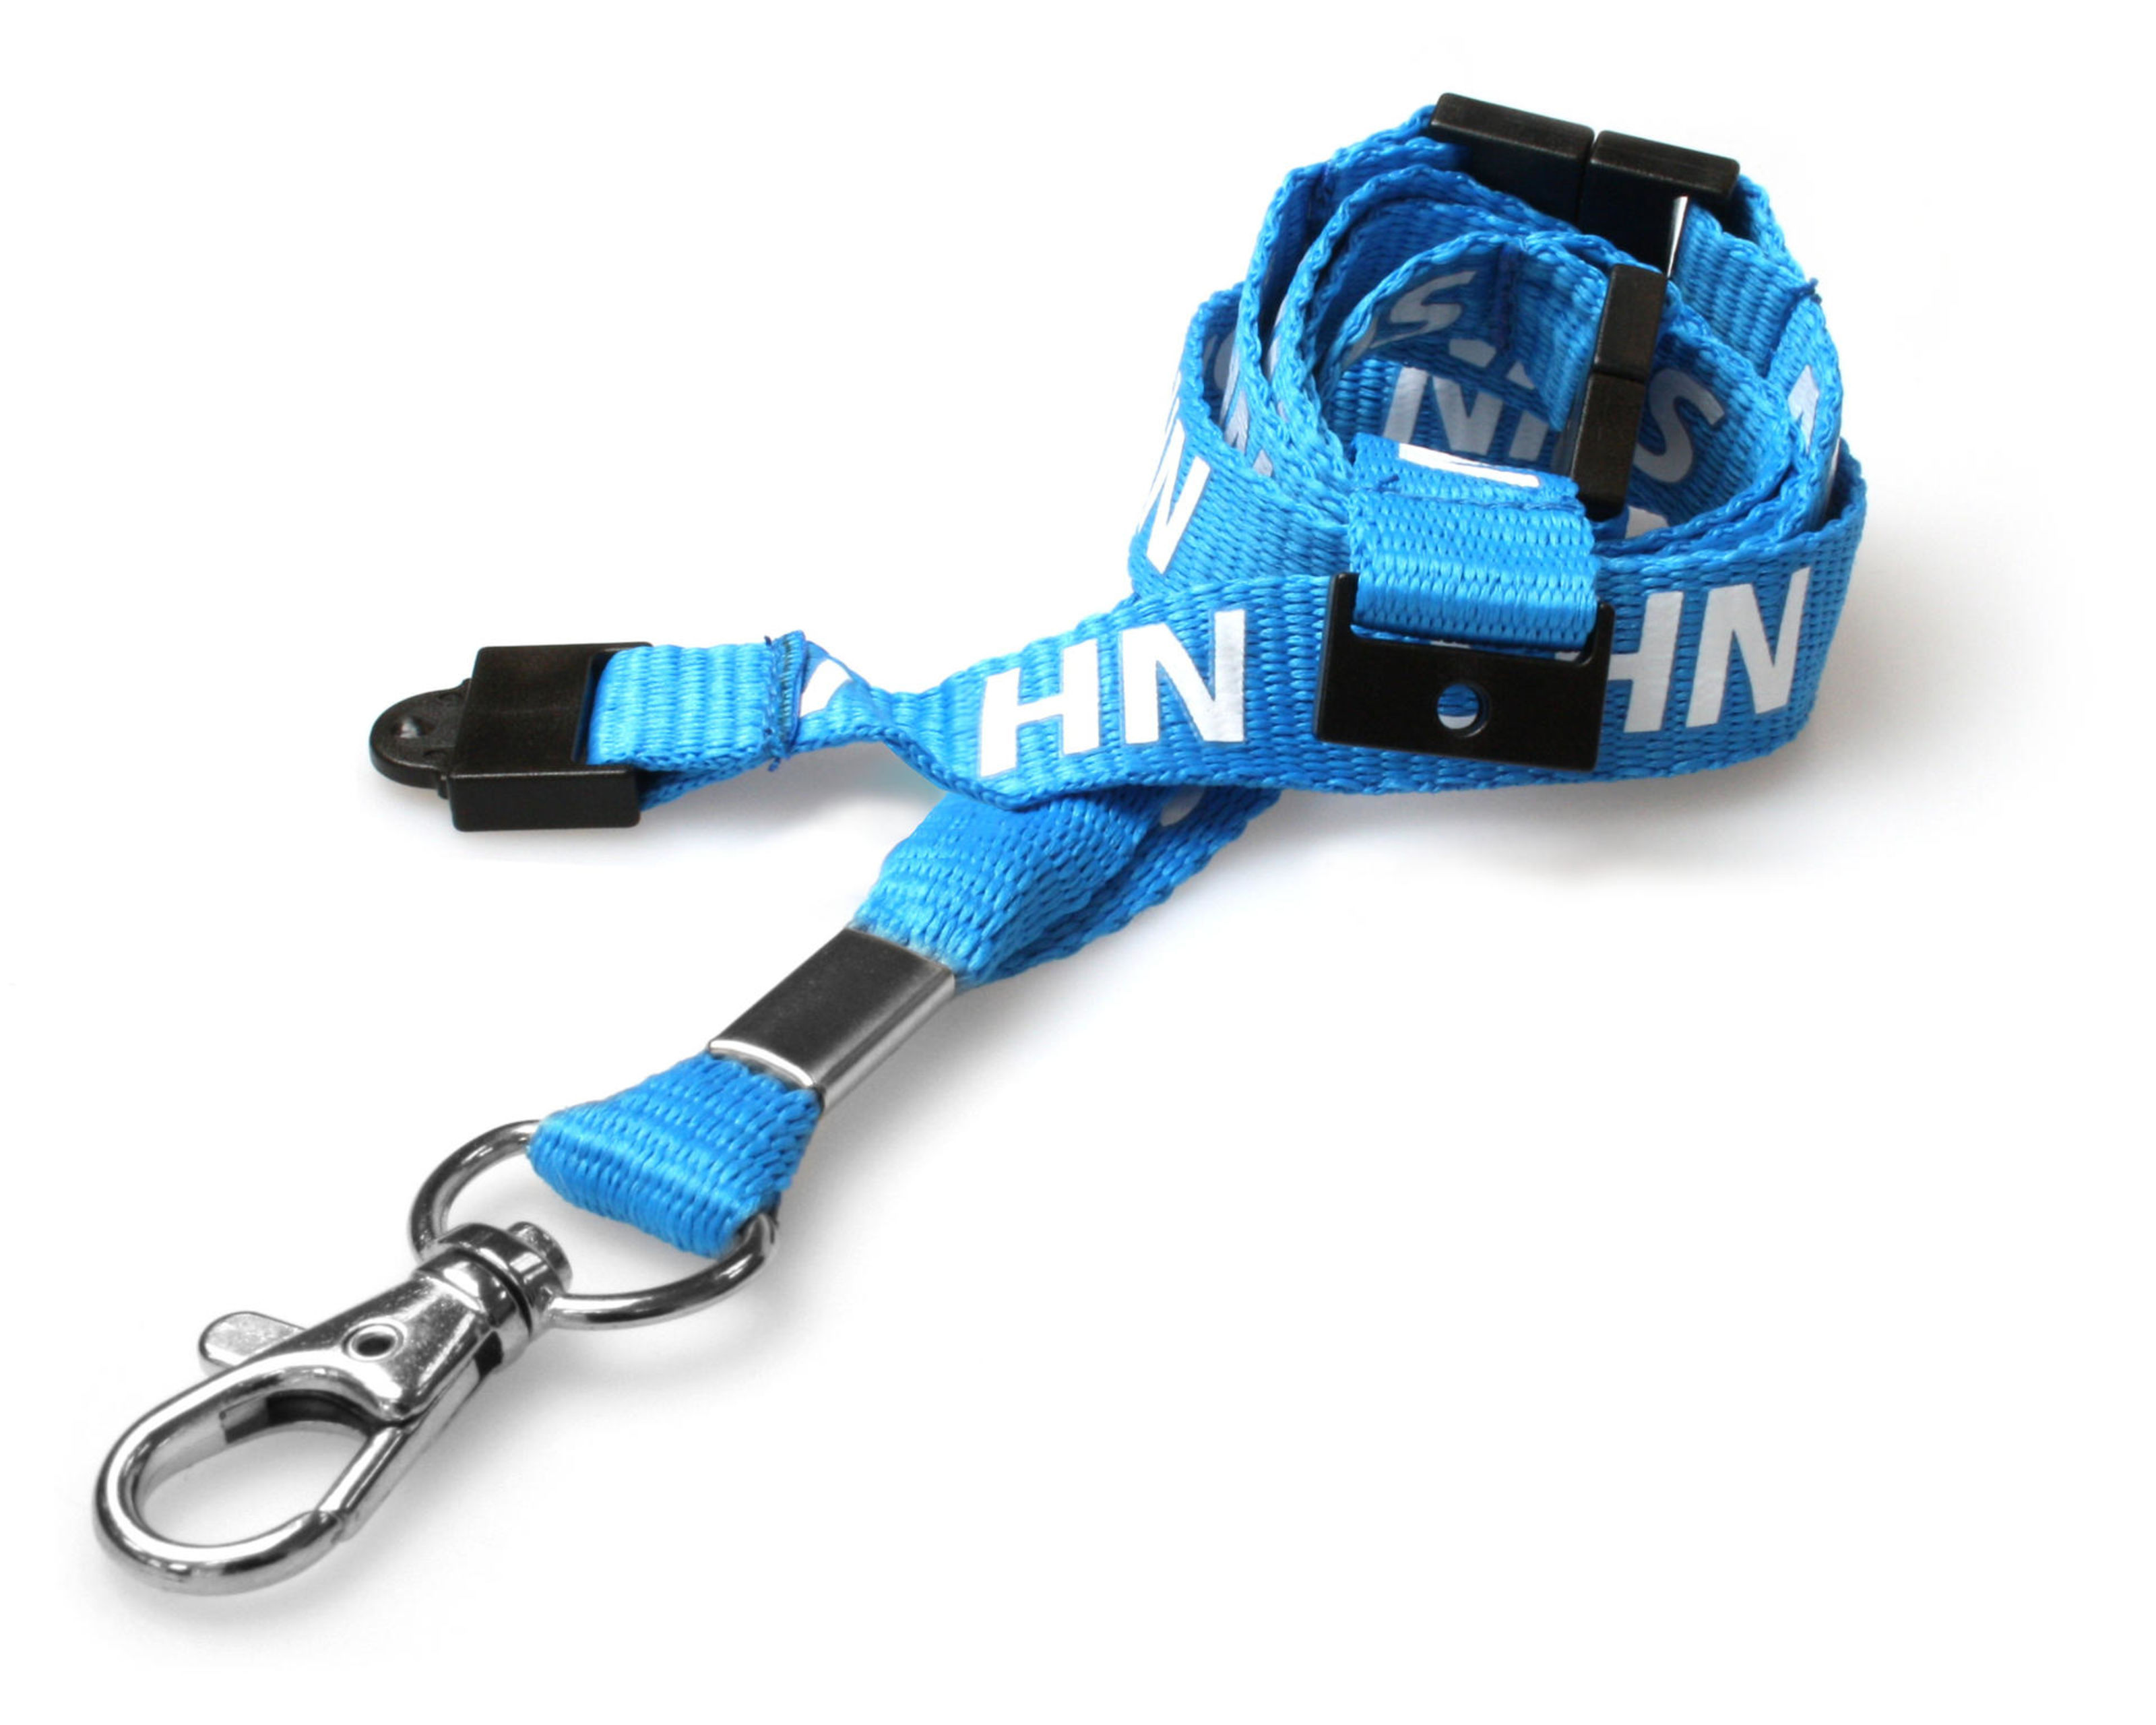 https://www.lesar.co.uk/images/pictures/main-category-pics/lanyards-page/l-p-nhsts-(gallery).jpg?v=be1b7edd&mode=h